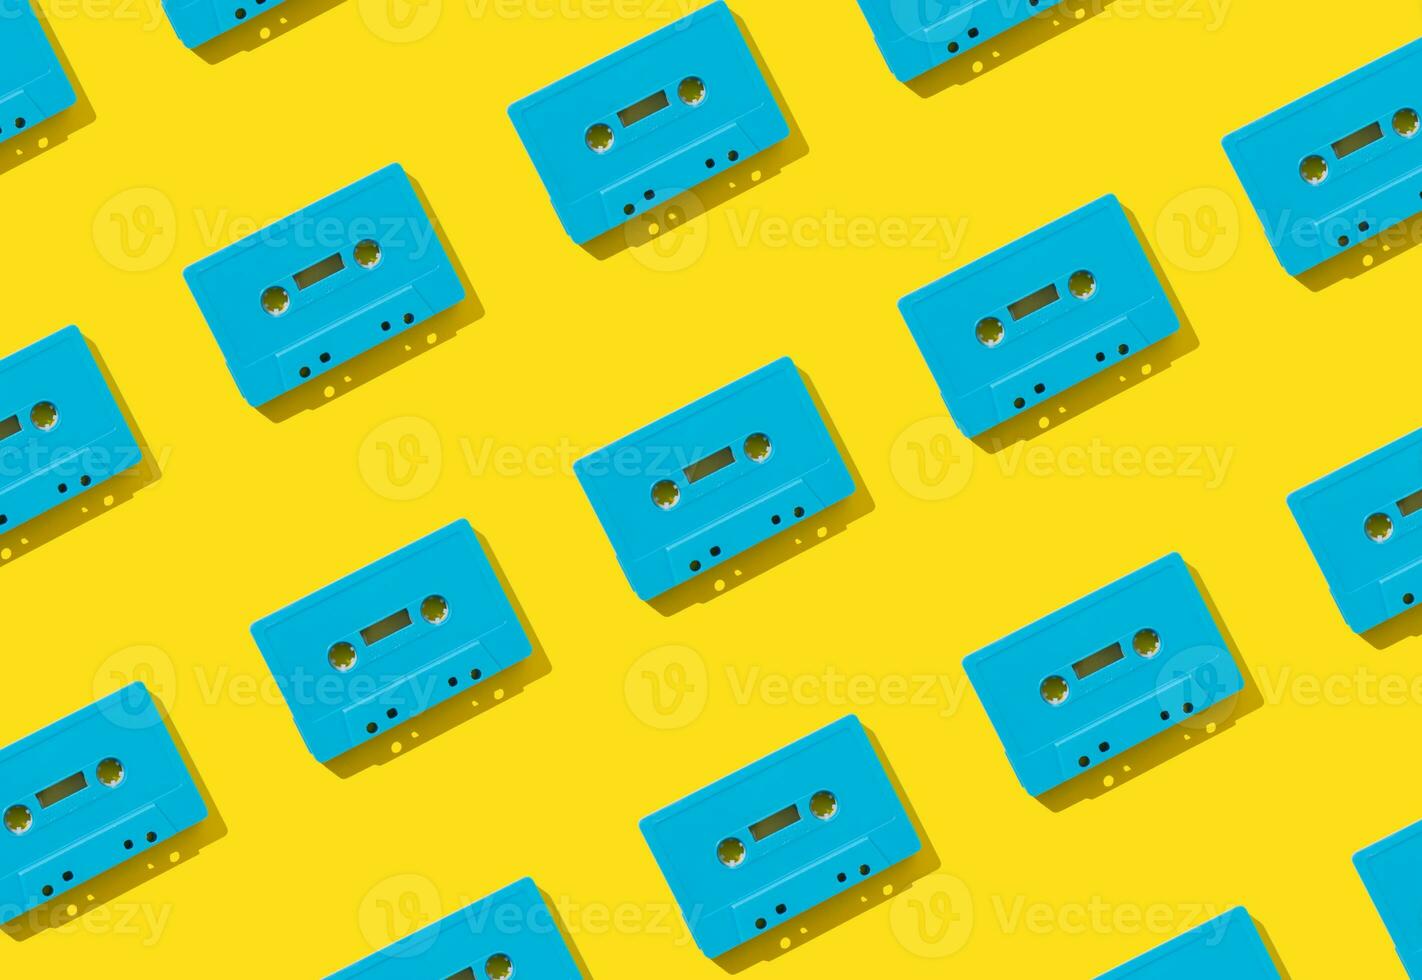 Pattern made with retro blue audio cassette tapes on yellow background. Creative concept of retro technology. 80's aesthetic. Vintage audio cassette tape pattern idea. Retro nostalgia. Flat lay. photo